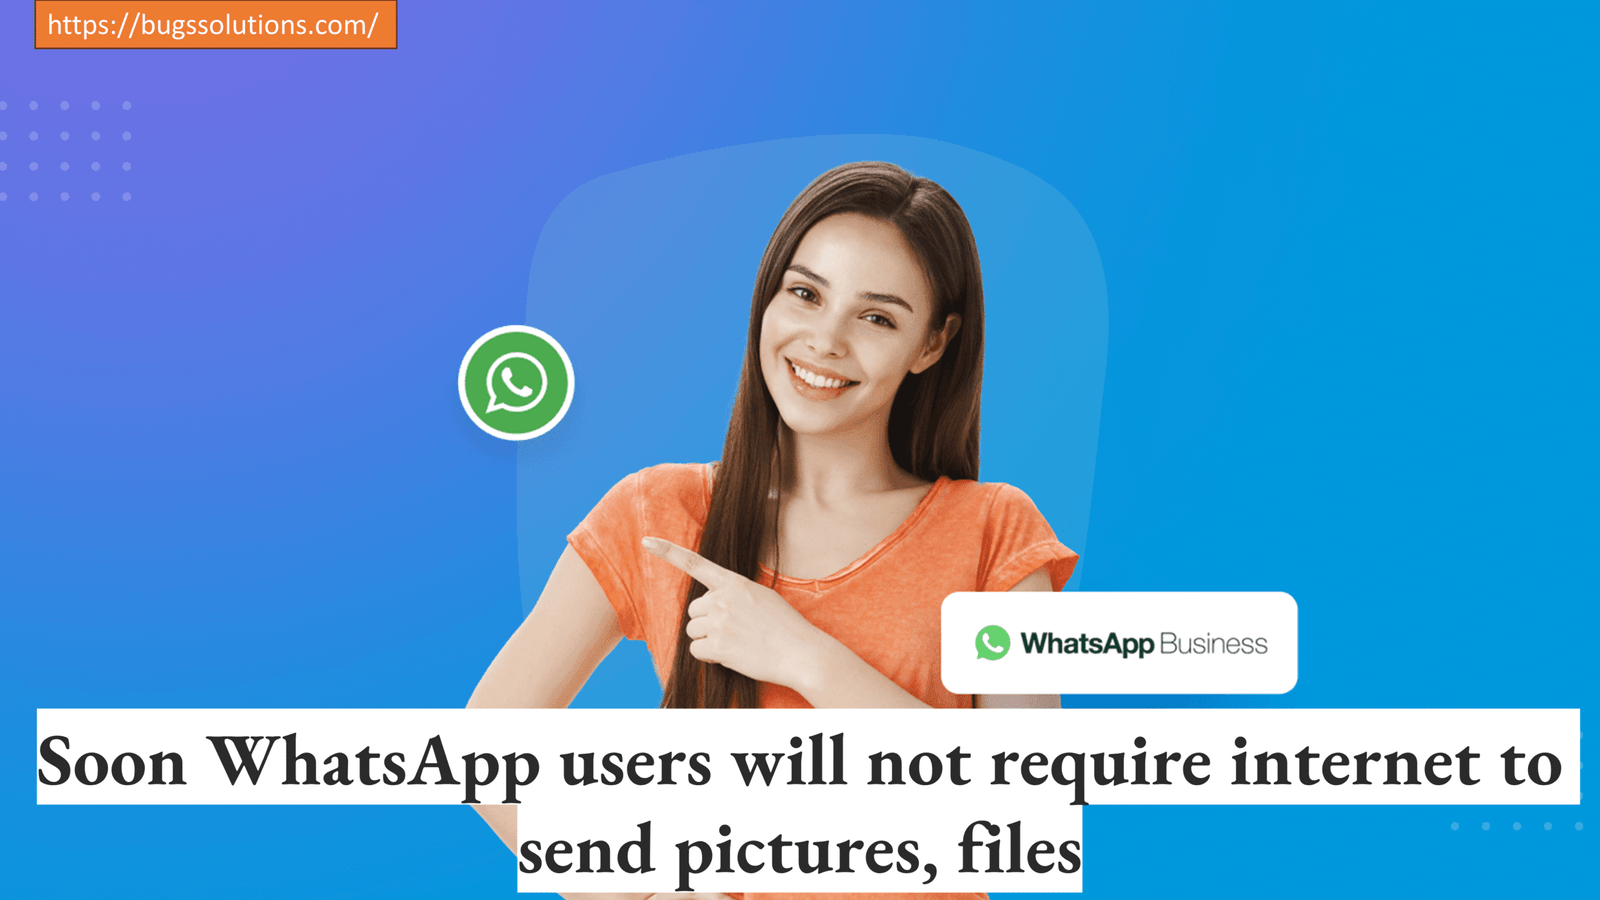 Soon WhatsApp users will not require internet to send pictures, files